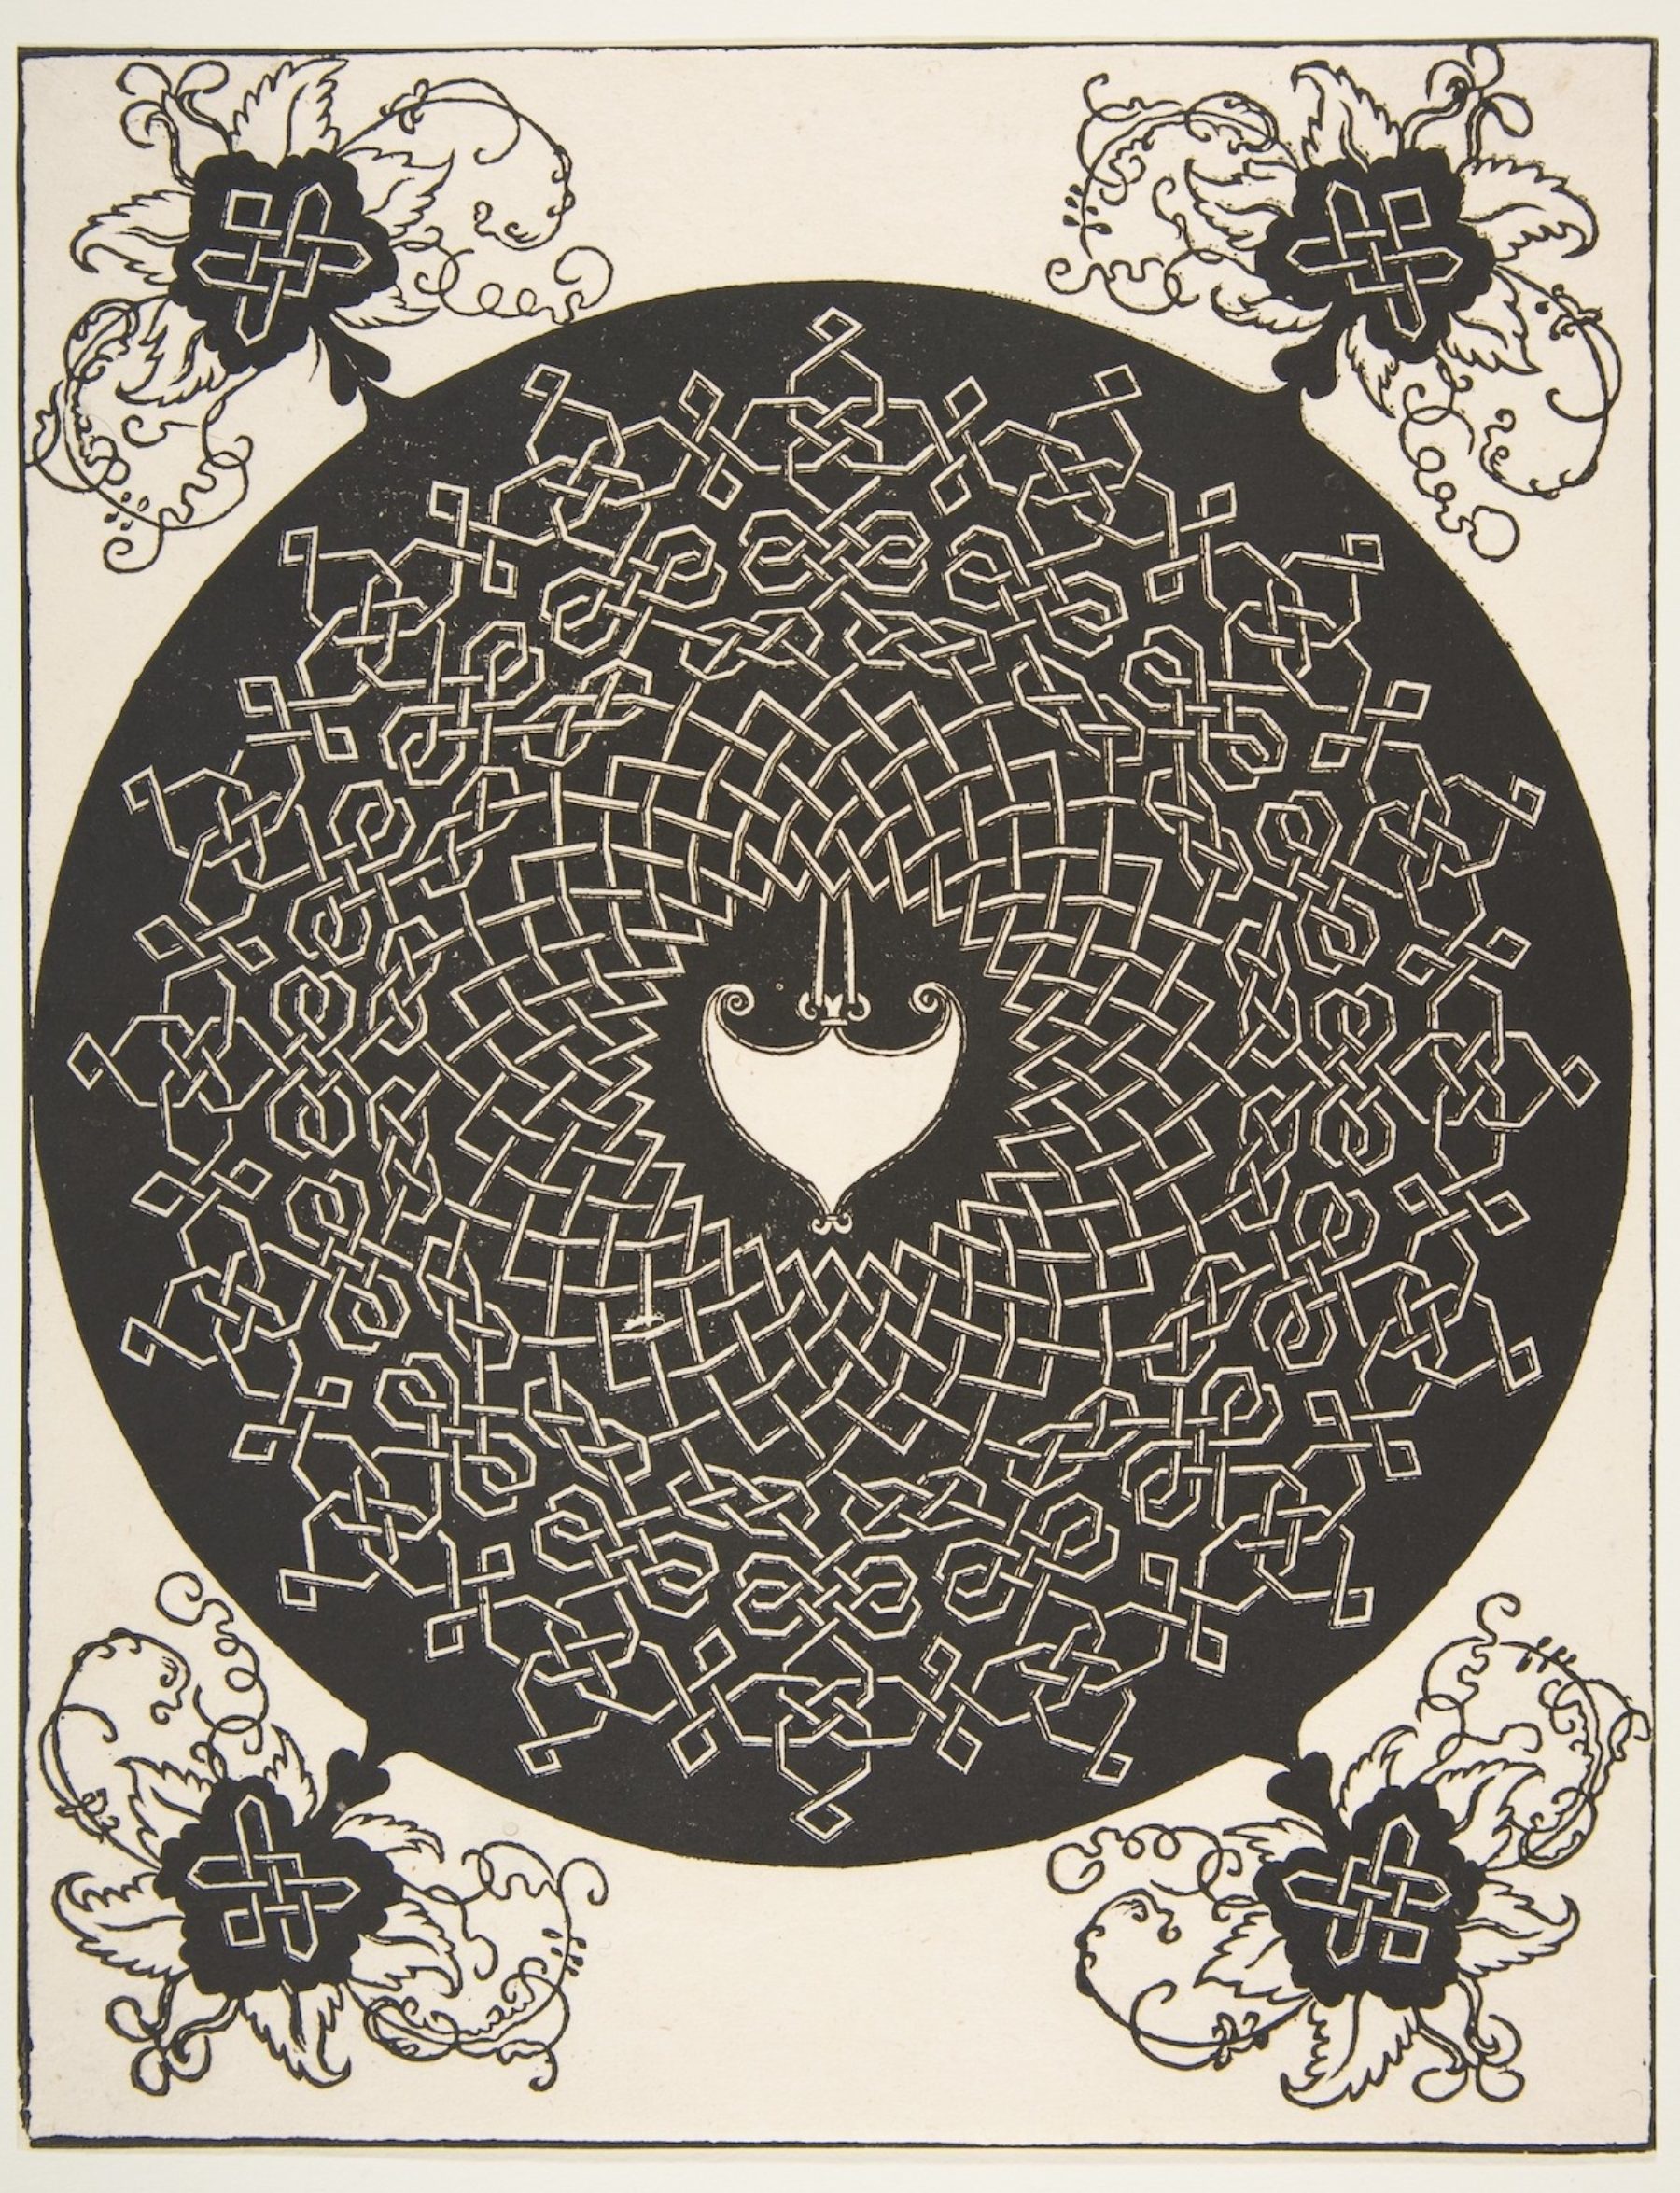 Albrecht Dürer, The First Knot. Interlaced Roundel with an Oblong Panel in its Center, ca. 1521, woodcut, 10 11/16 x 8 3/8 inches (27.1 x 21.2 cm). George Khuner Collection. Bequest of Marianne Khuner, 1984. Courtesy of The Metropolitan Museum of Art